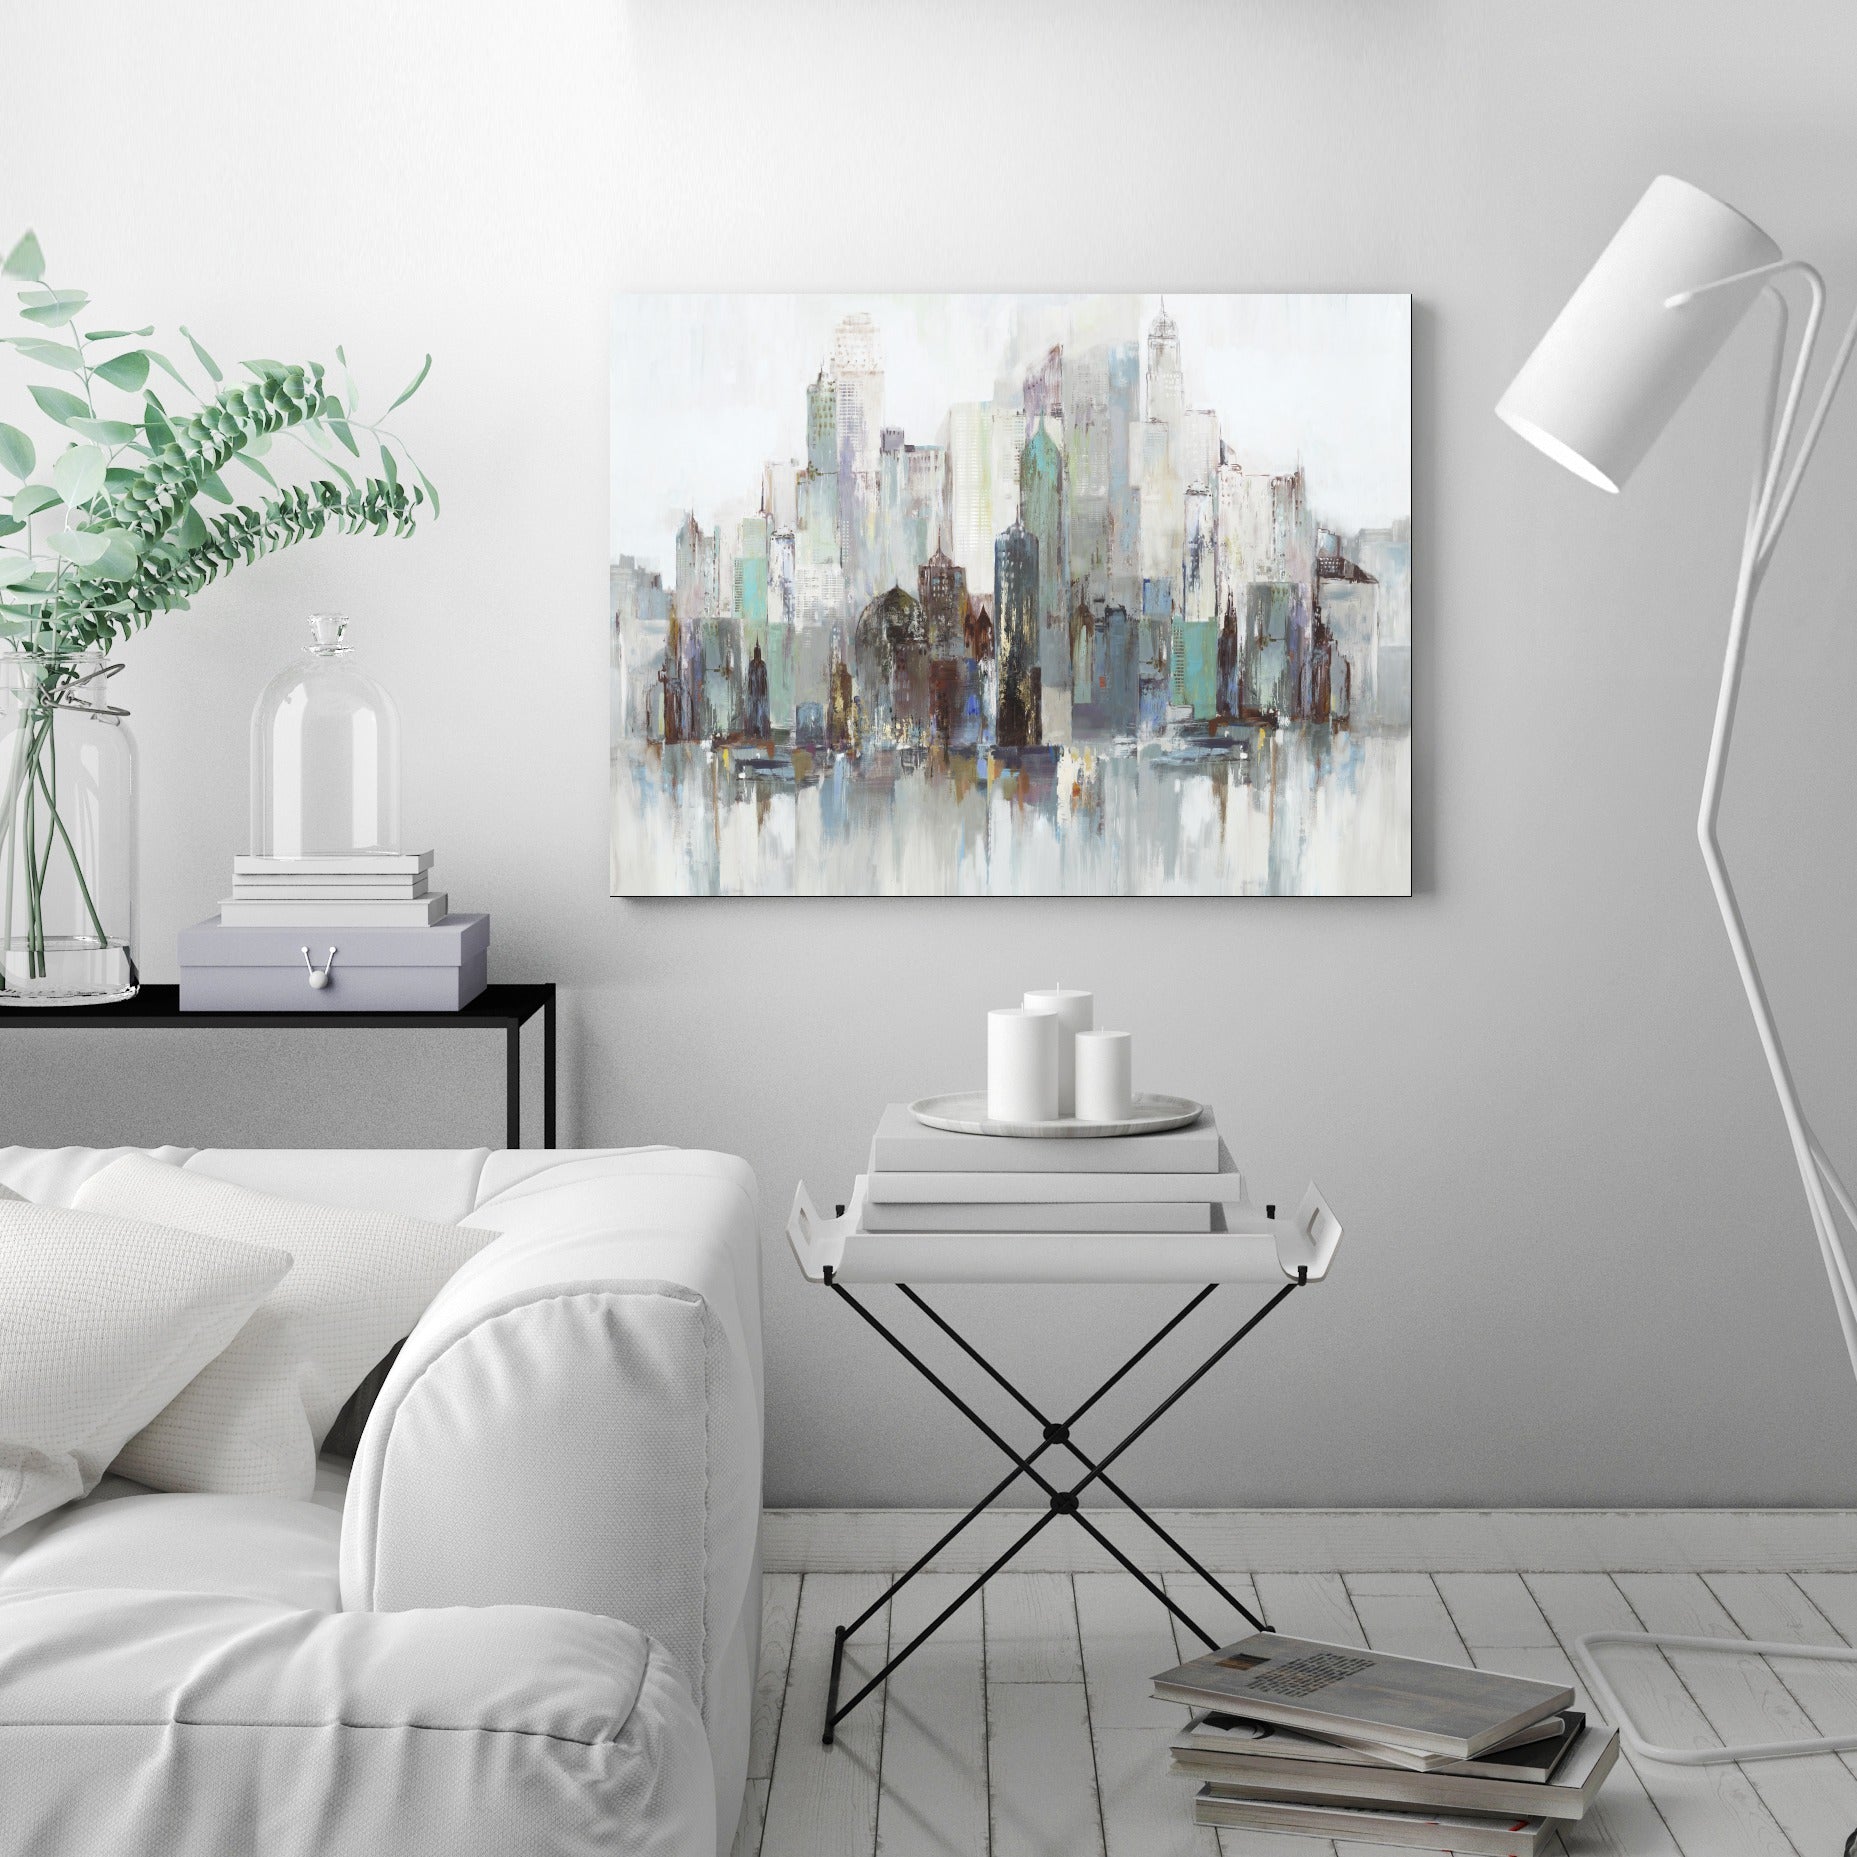 City Escape Ii by PI Creative Art - Wrapped Canvas - Americanflat